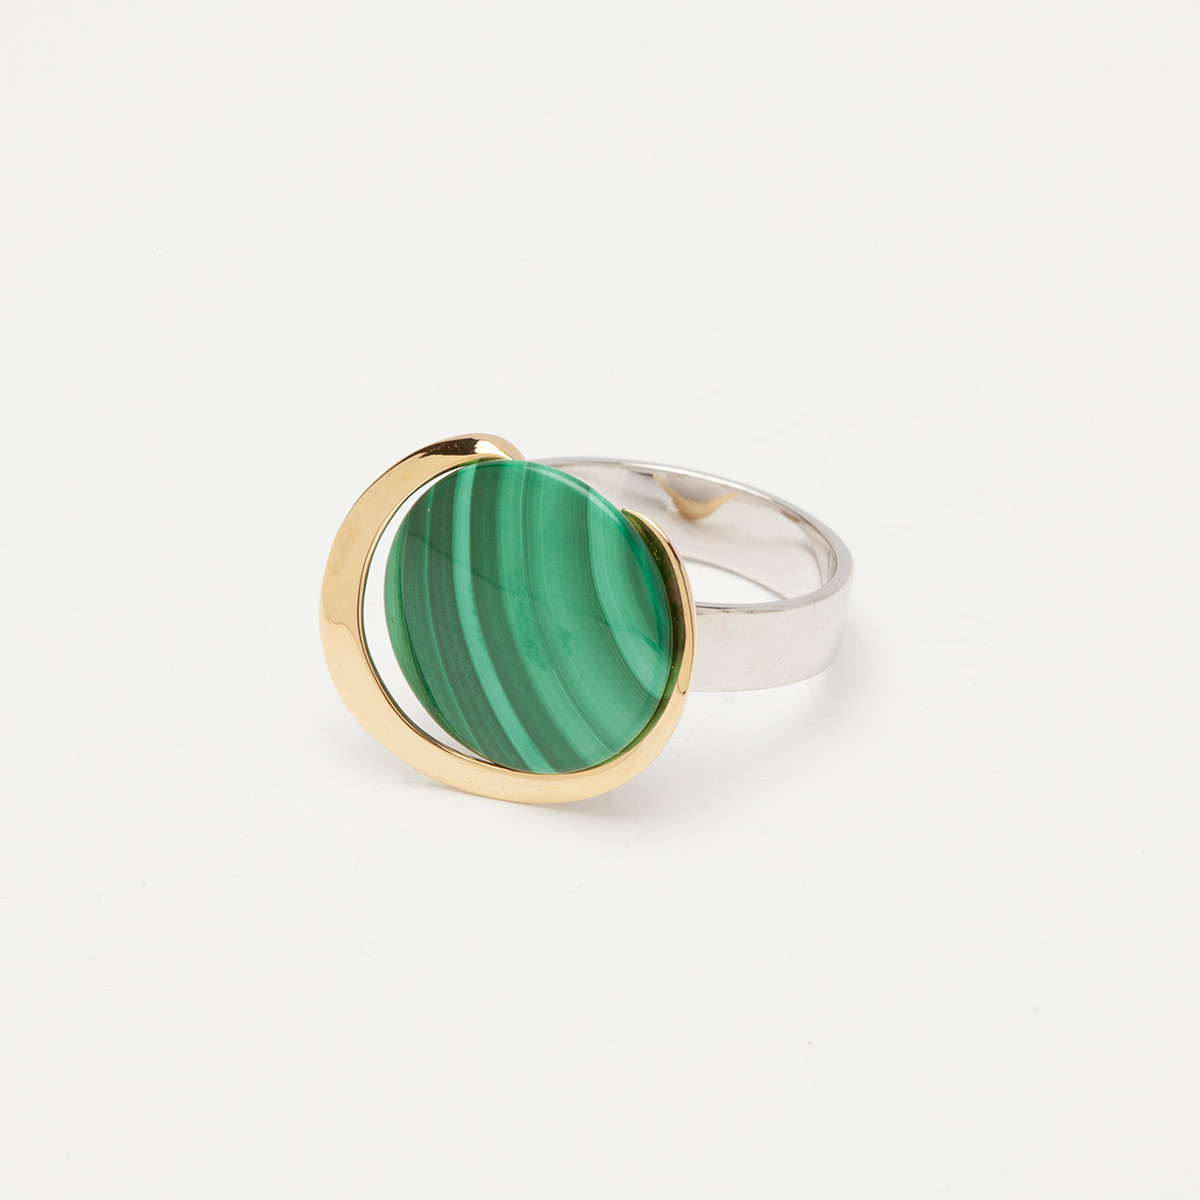 Moa handmade ring in 9k or 18k gold, sterling silver and malachite 2 designed by Belen Bajo